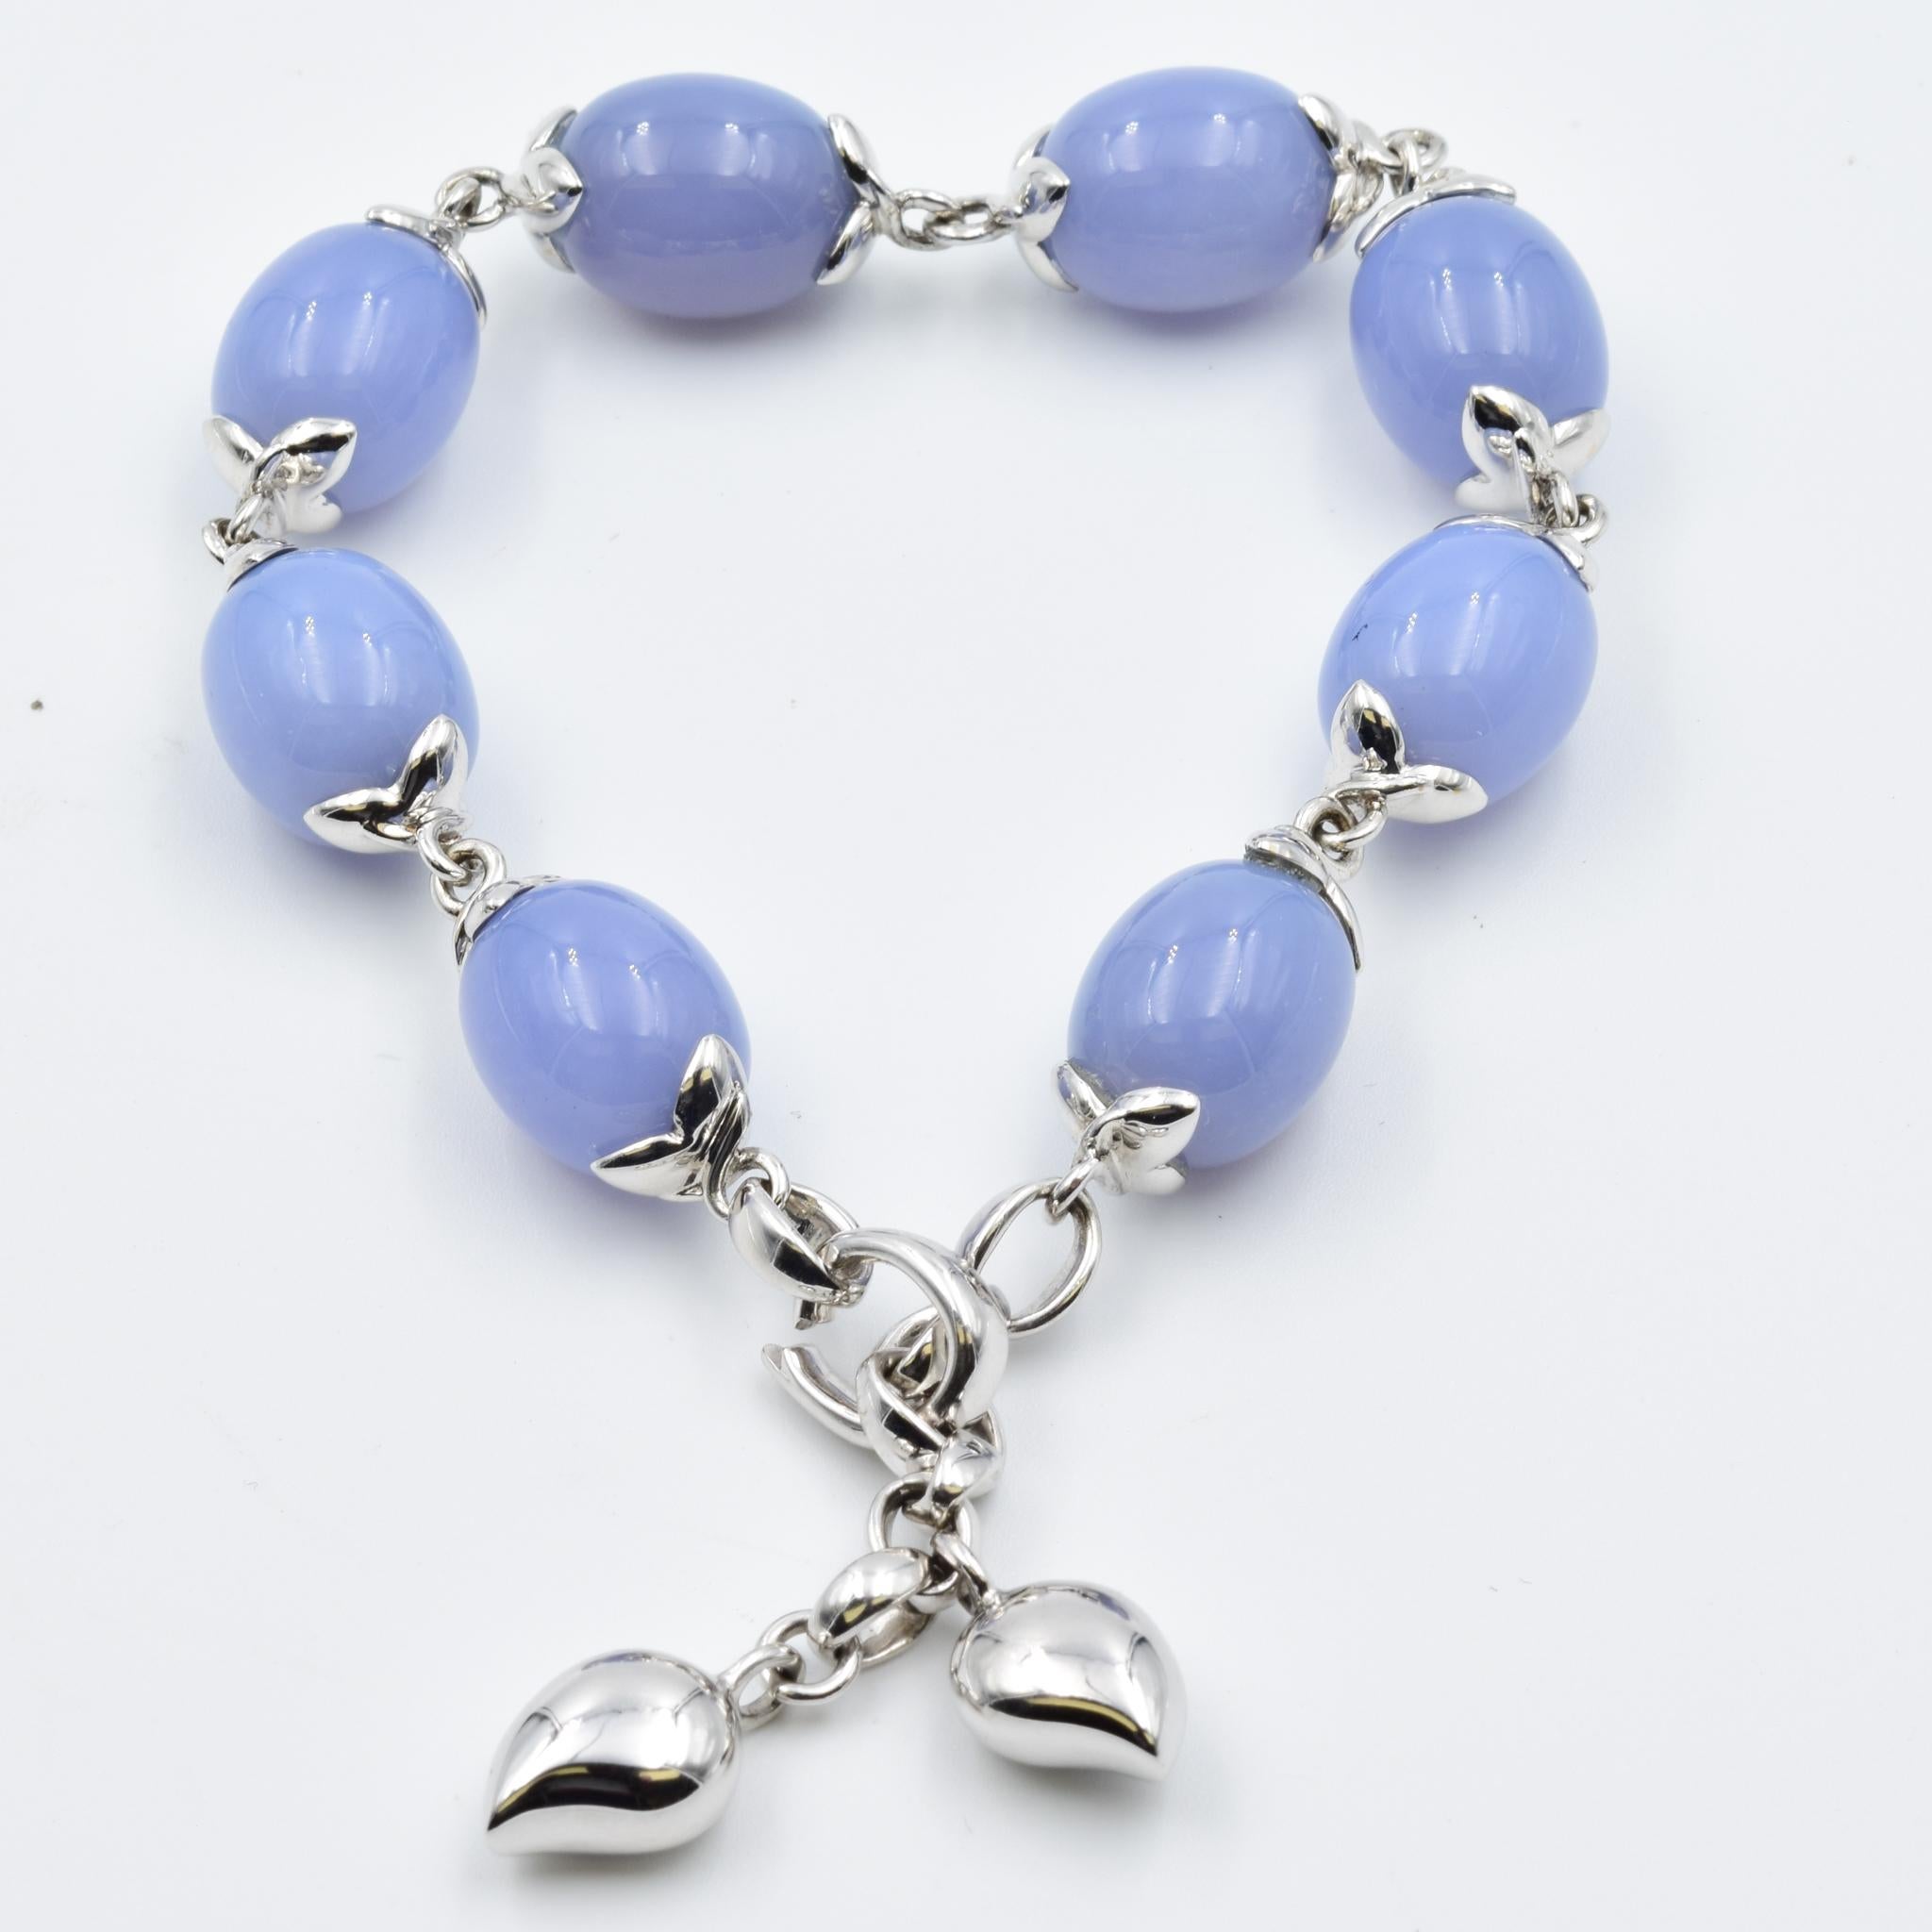 The COCONUT bracelet features eight natural, olive-shaped beads of shimmering blue chalcedony. This timelessly elegant bracelet is easy to wear and fits any wrist size.  This is a glamorous design which can be worn casually or to a fancy night out.